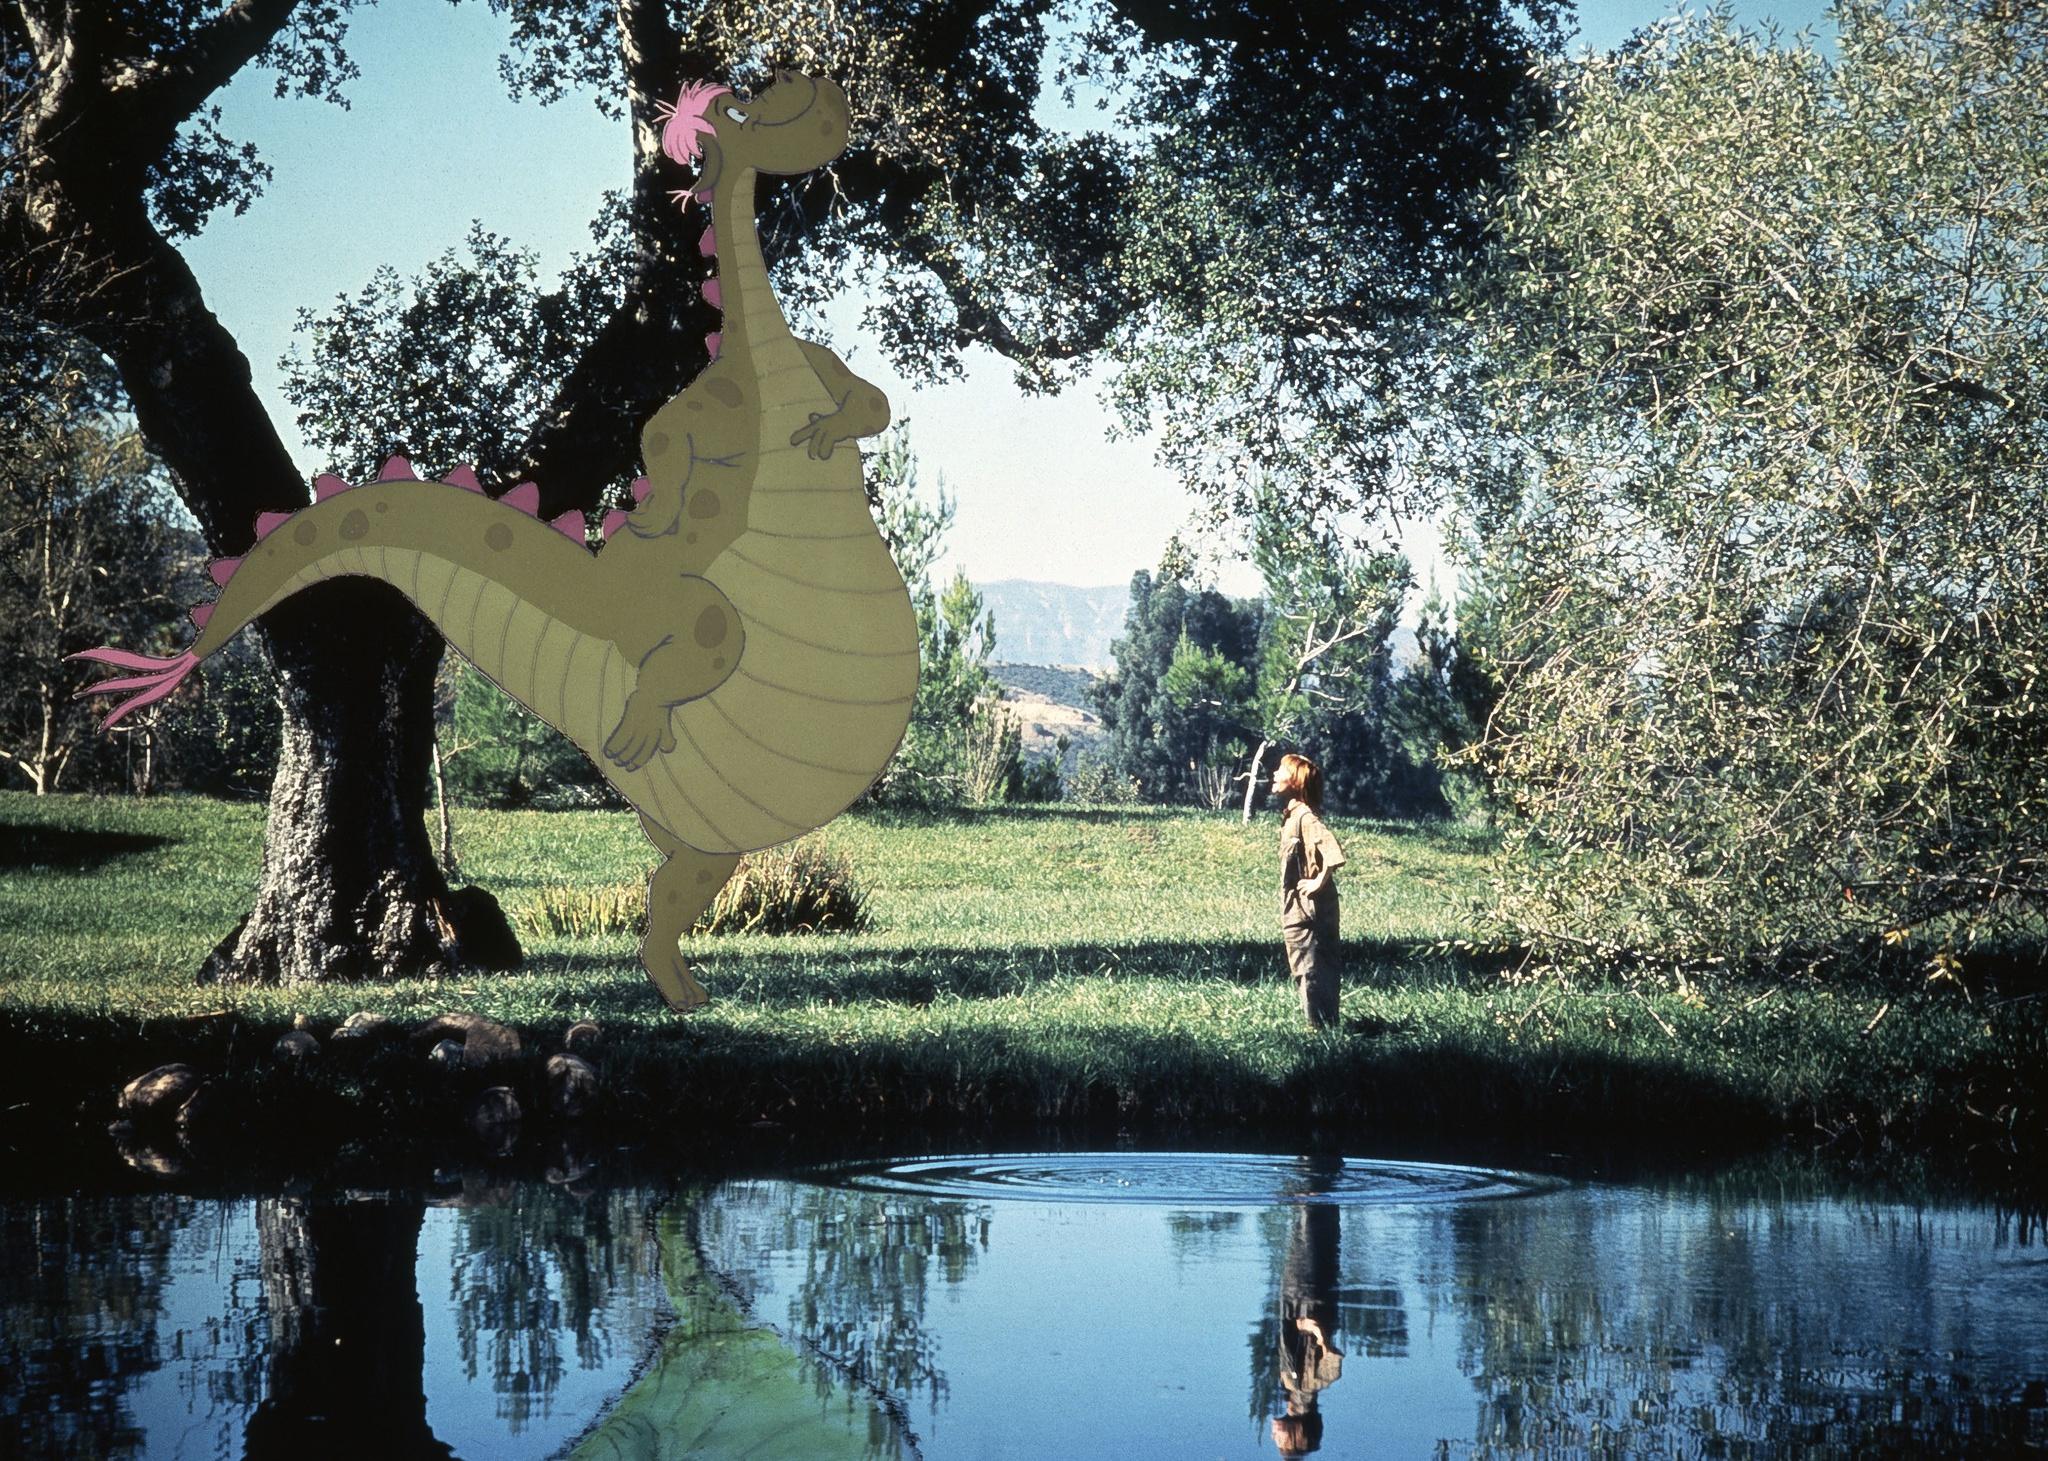 A boy in front of a pond next to a cartoon dragon.